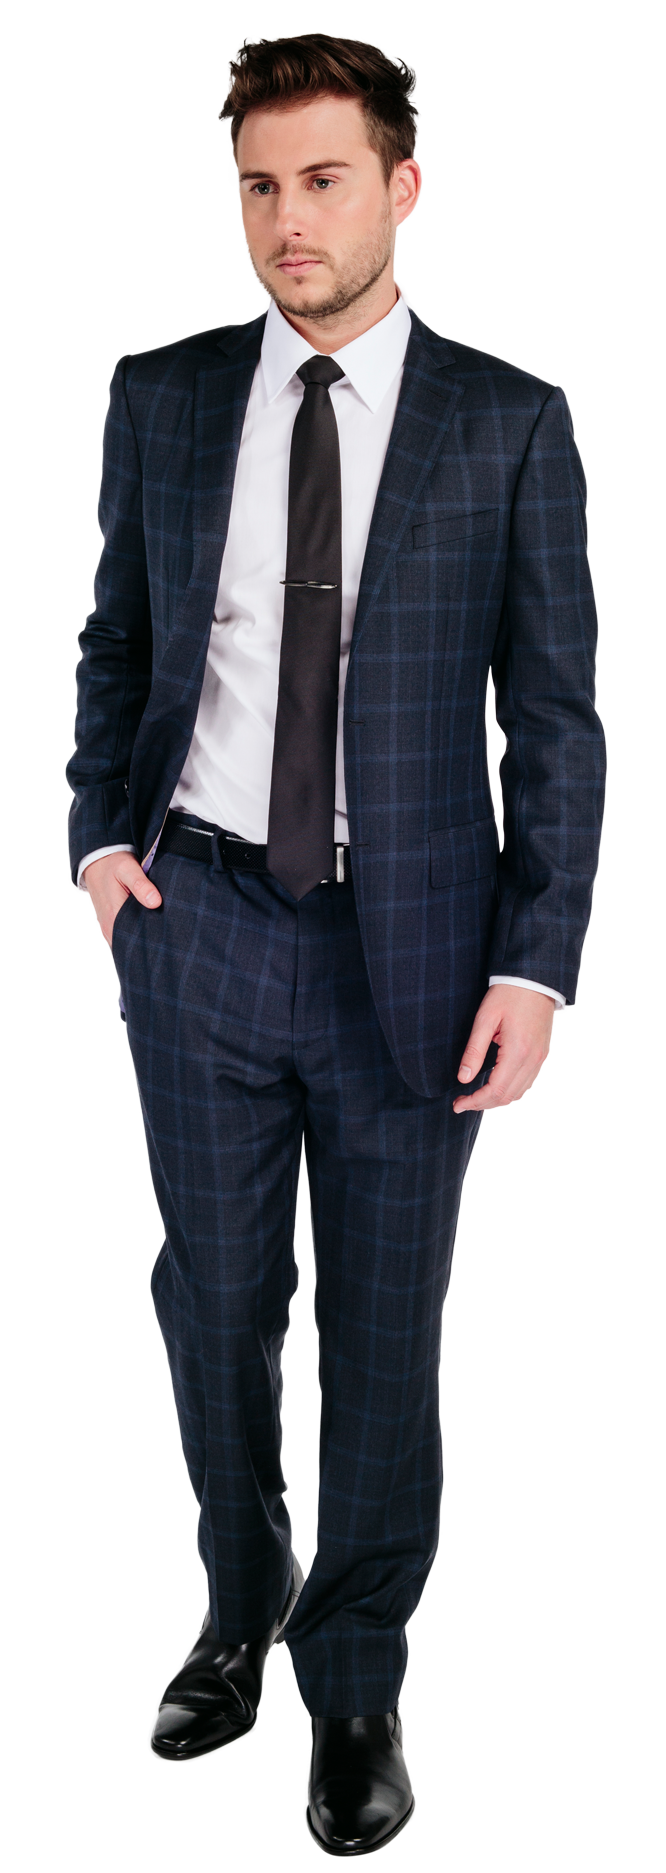 Man In Suit PNG Photo | PNG Arts